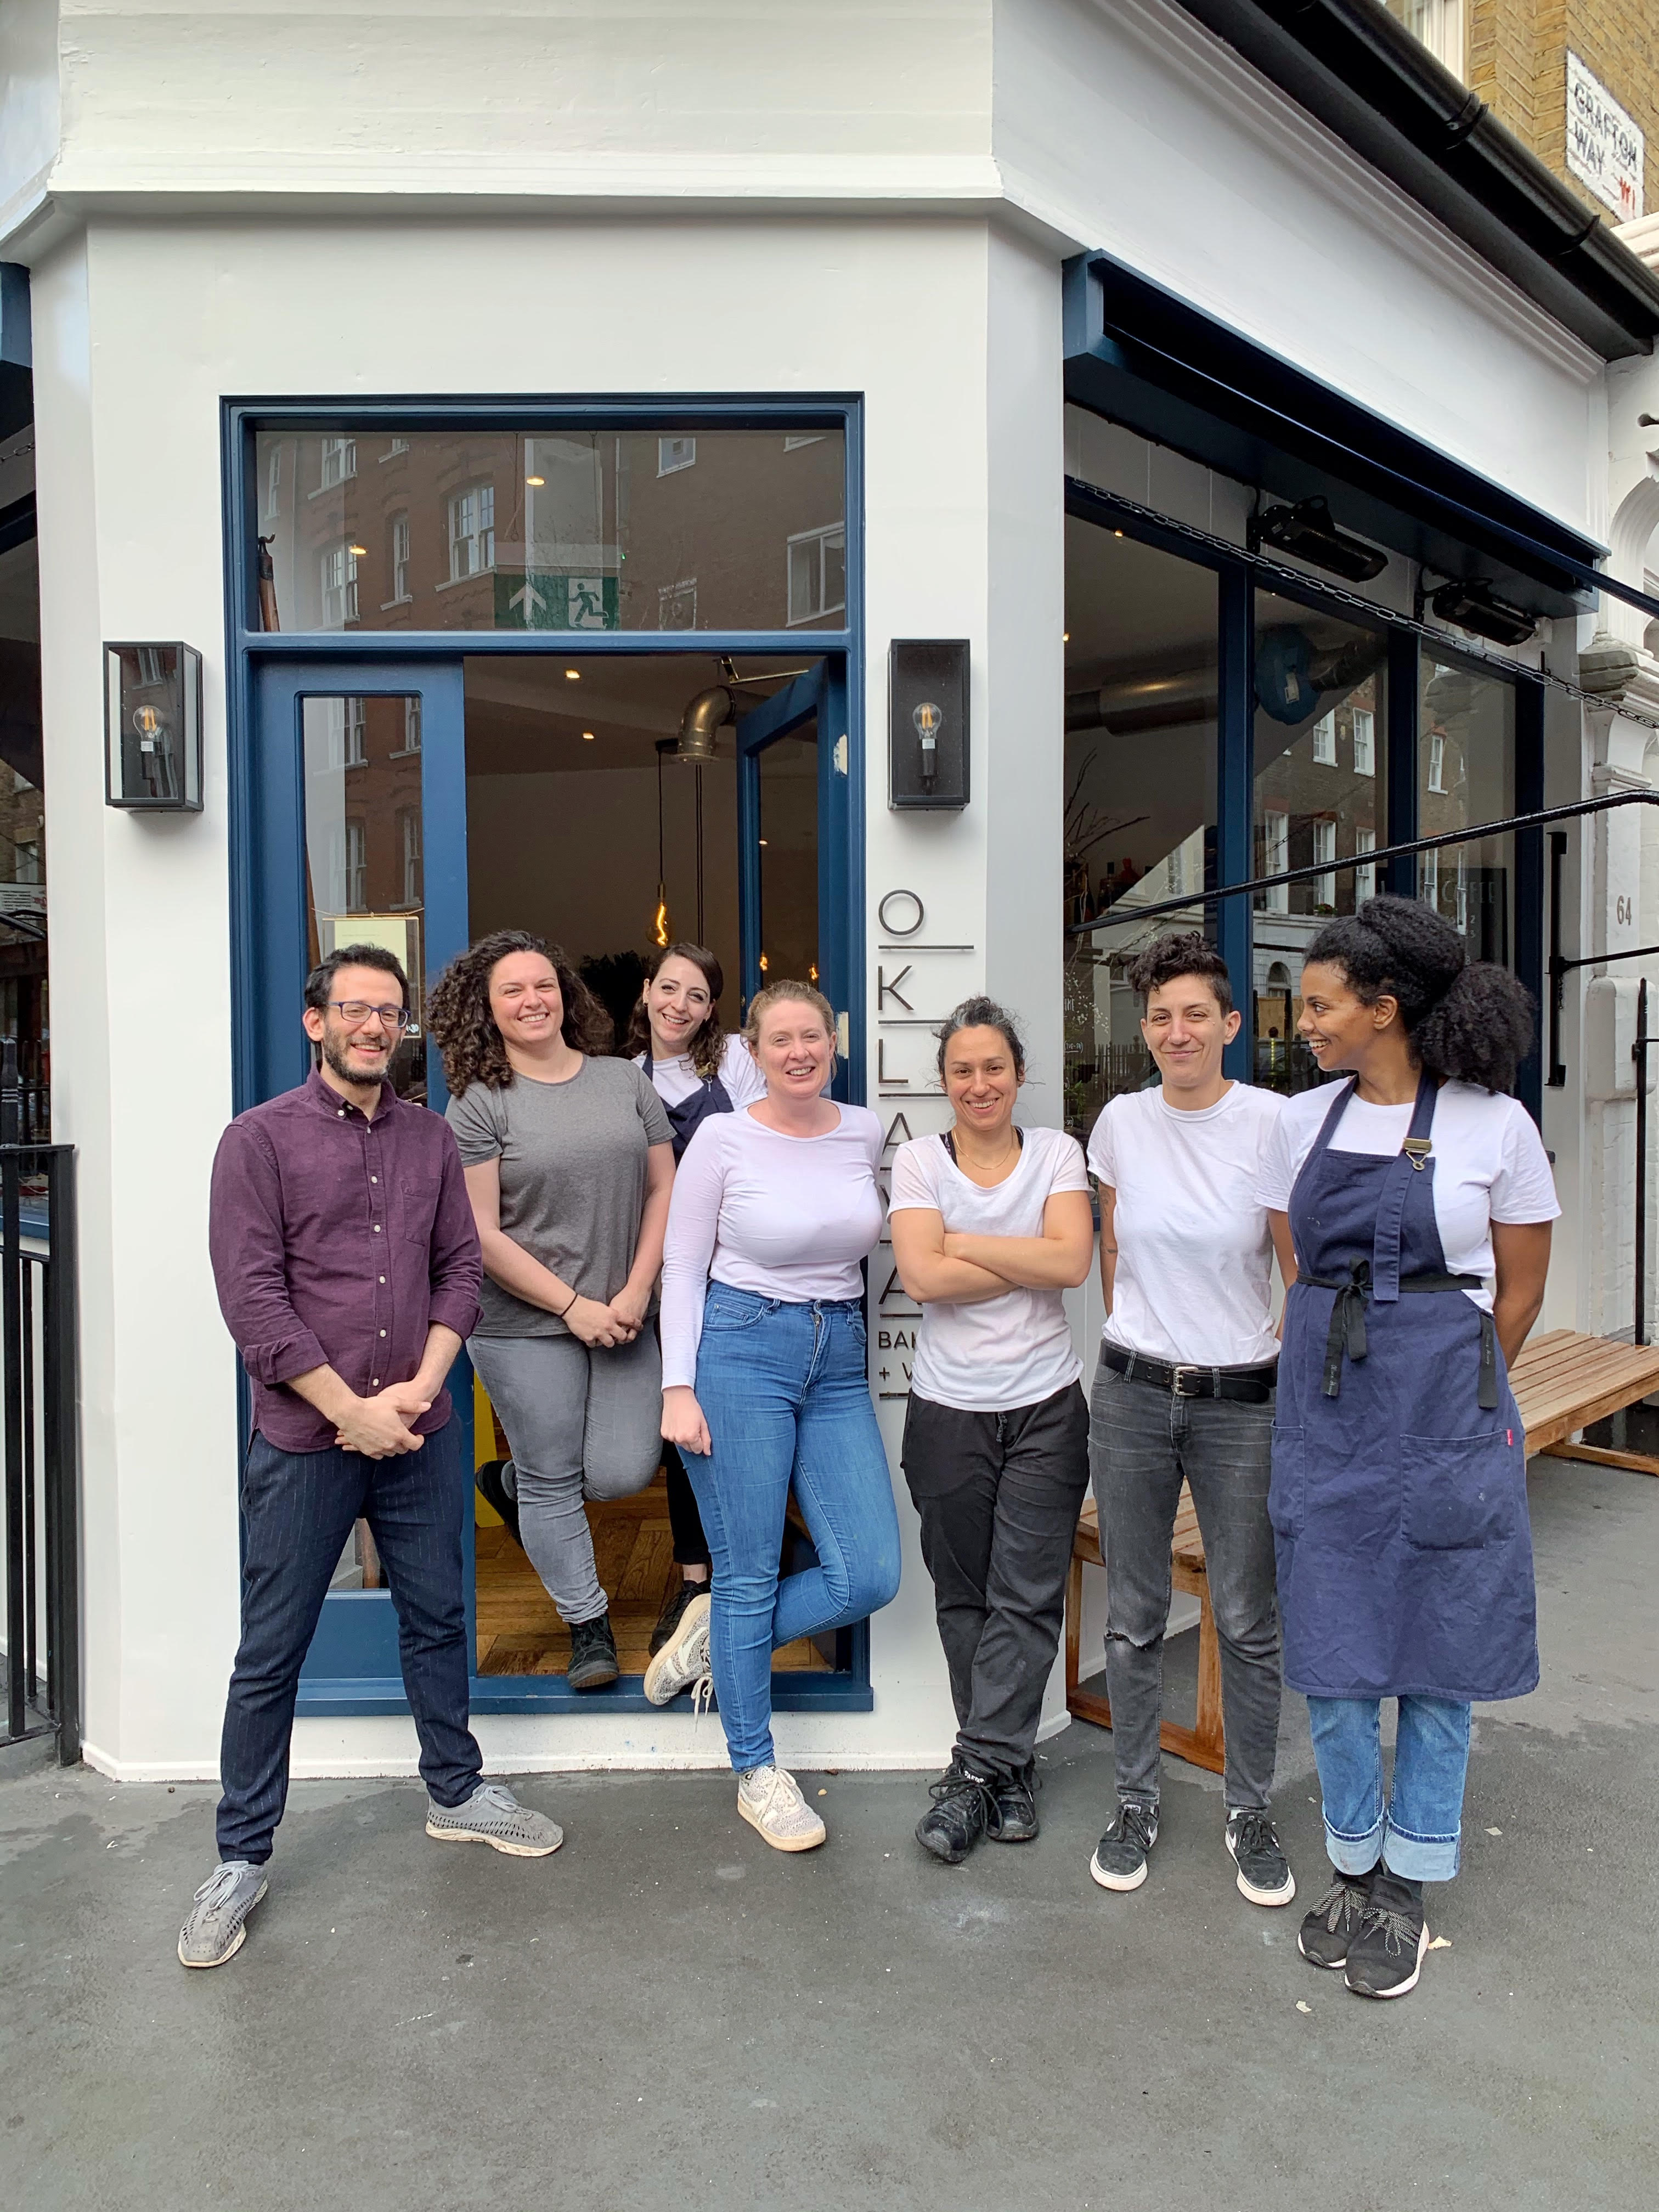 The Oklava team outside its recently opened Fitzrovia bakery and wine bar has challenged Home Secretary Priti Patel over the government’s recently announced immigration system overhaul